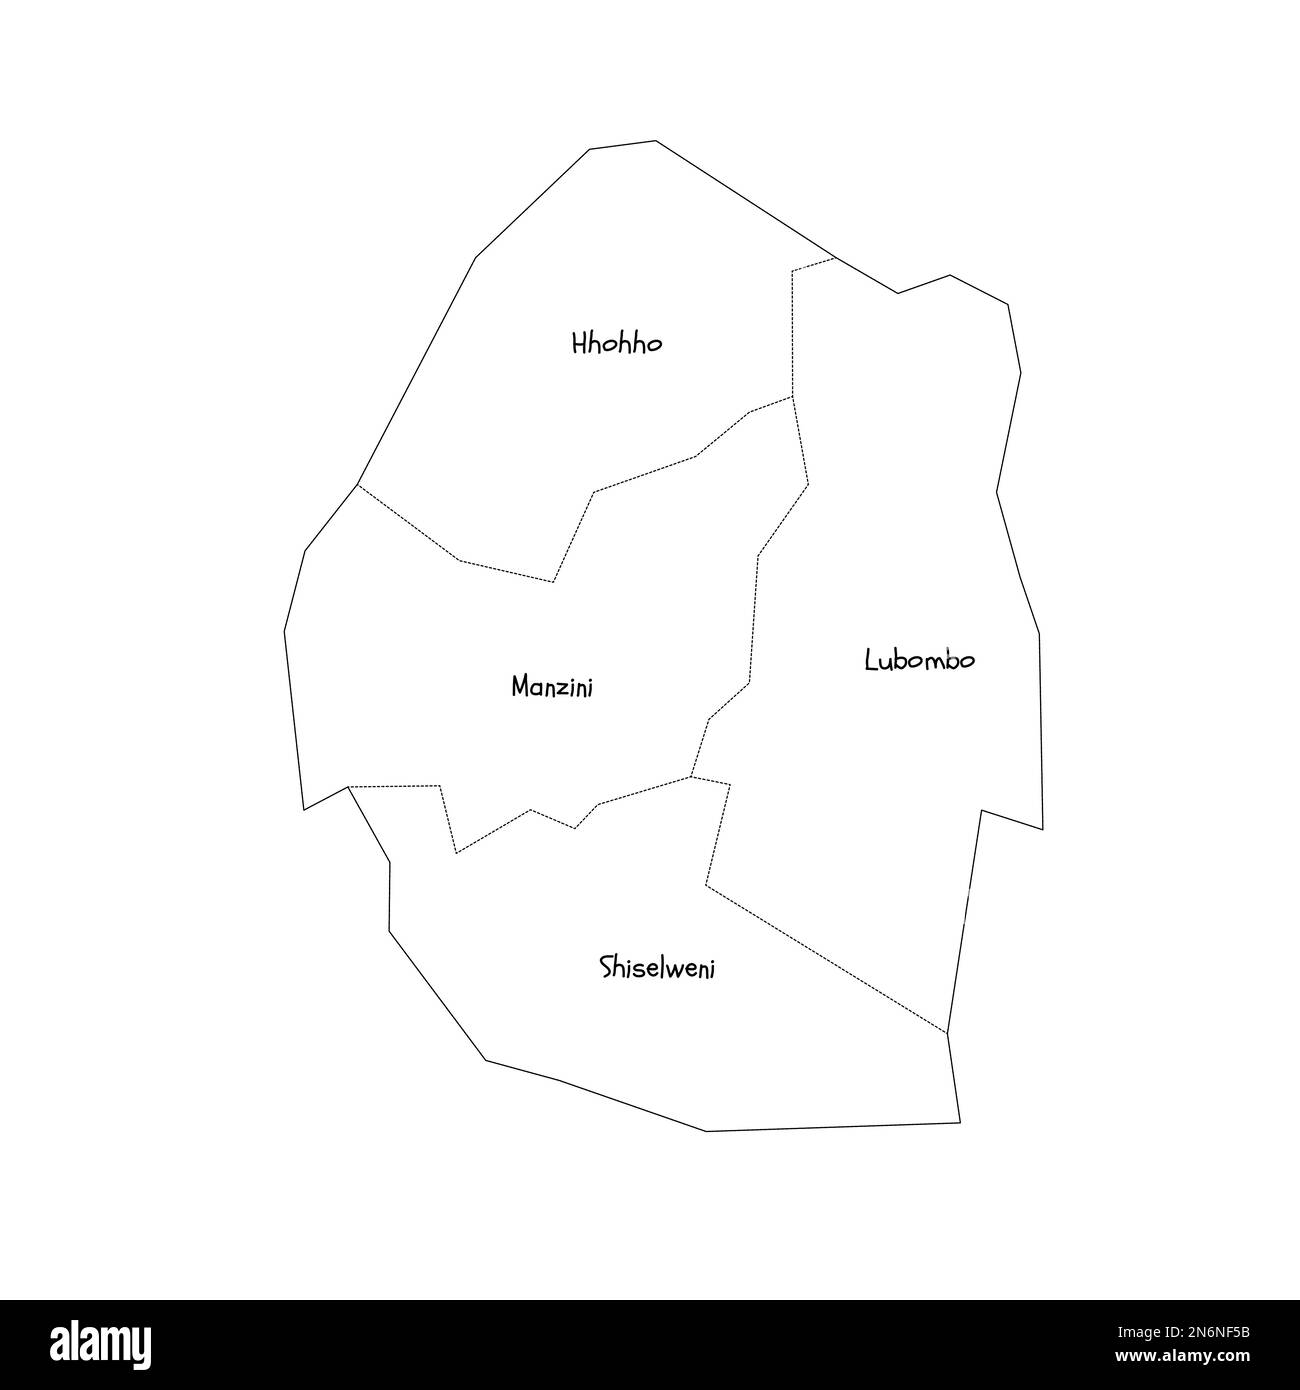 Eswatini political map of administrative divisions - regions. Handdrawn doodle style map with black outline borders and name labels. Stock Vector